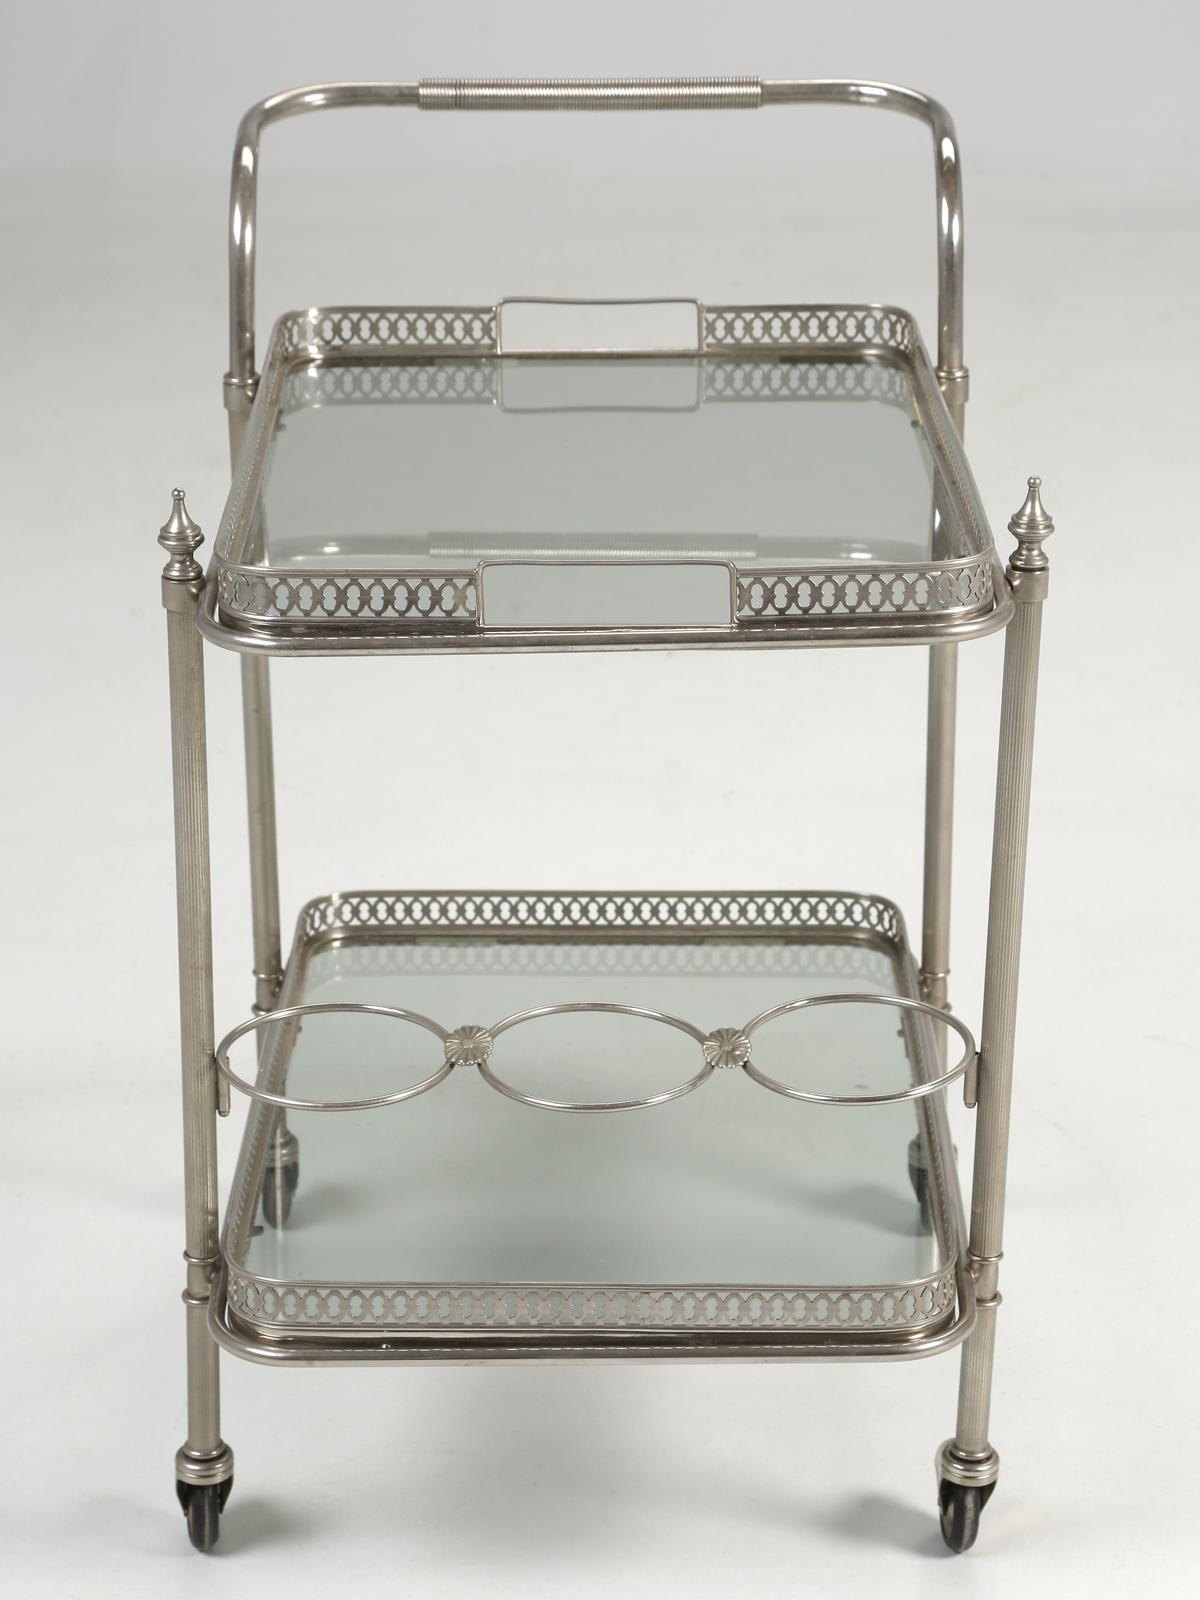 Vintage Mid-Century Modern bar cart imported from France. Our vintage French bar cart or some might try to refer to it was a tea cart, was probably made in the 1950's from chrome plated steel and does show some wear, but nothing stands out when you